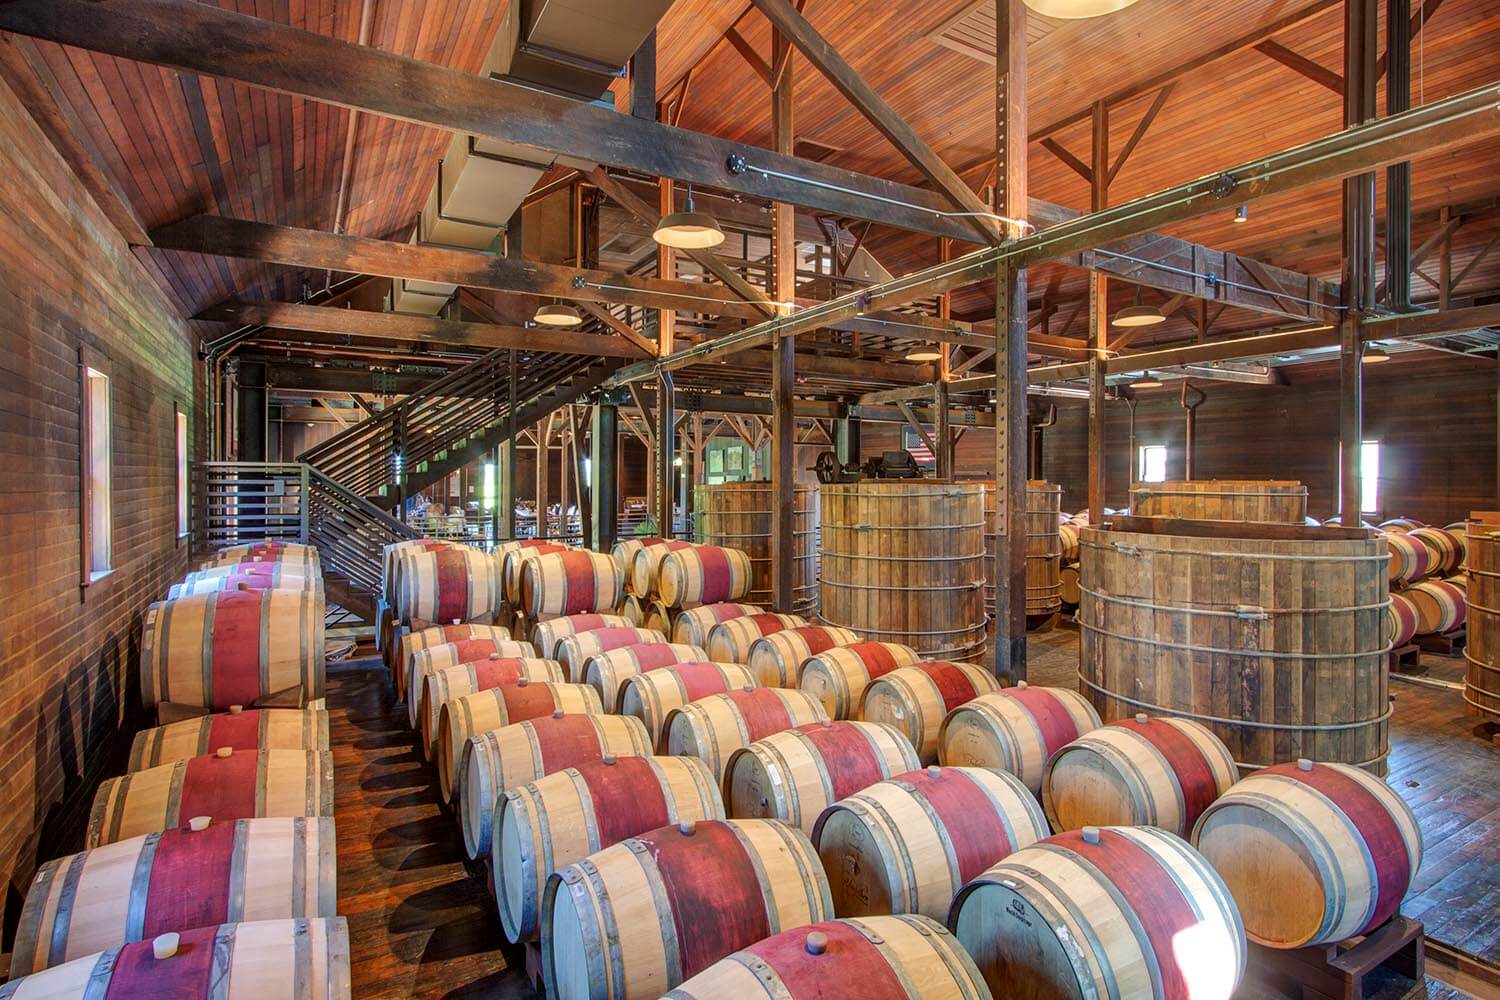 Interior view of wine barrel storage room with wine-stained barrels and other winery equipment